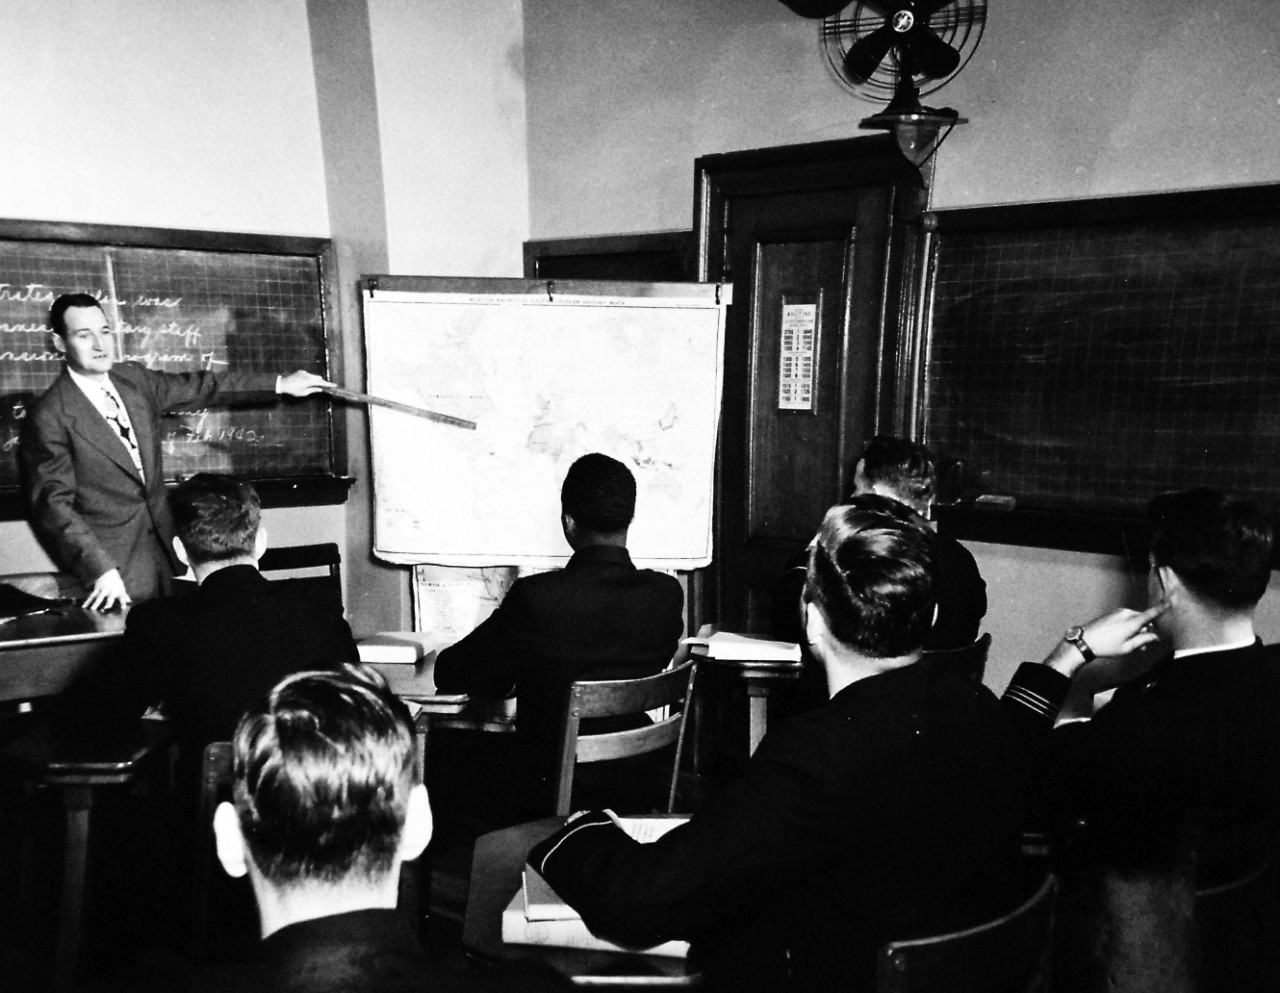 80-G-707014:   Midshipman Wesley Brown, June 1949.   U.S. Naval Academy, Annapolis, Maryland.  Shown:  Lecture in Department of English, History and Government.  Course in “Elements of National Power”, released June 3, 1949.  In this group is Midshipman Wesley Brown.   Note, Brown was the first African-American to graduate from the U.S. Naval Academy and served as a Civil Engineer, retiring in June 1969 with the rank of Lieutenant Commander.   Brown died on May 12, 2012.   U.S. Navy Photograph, now in the collections of the National Archives.  Note, the image is curved.  